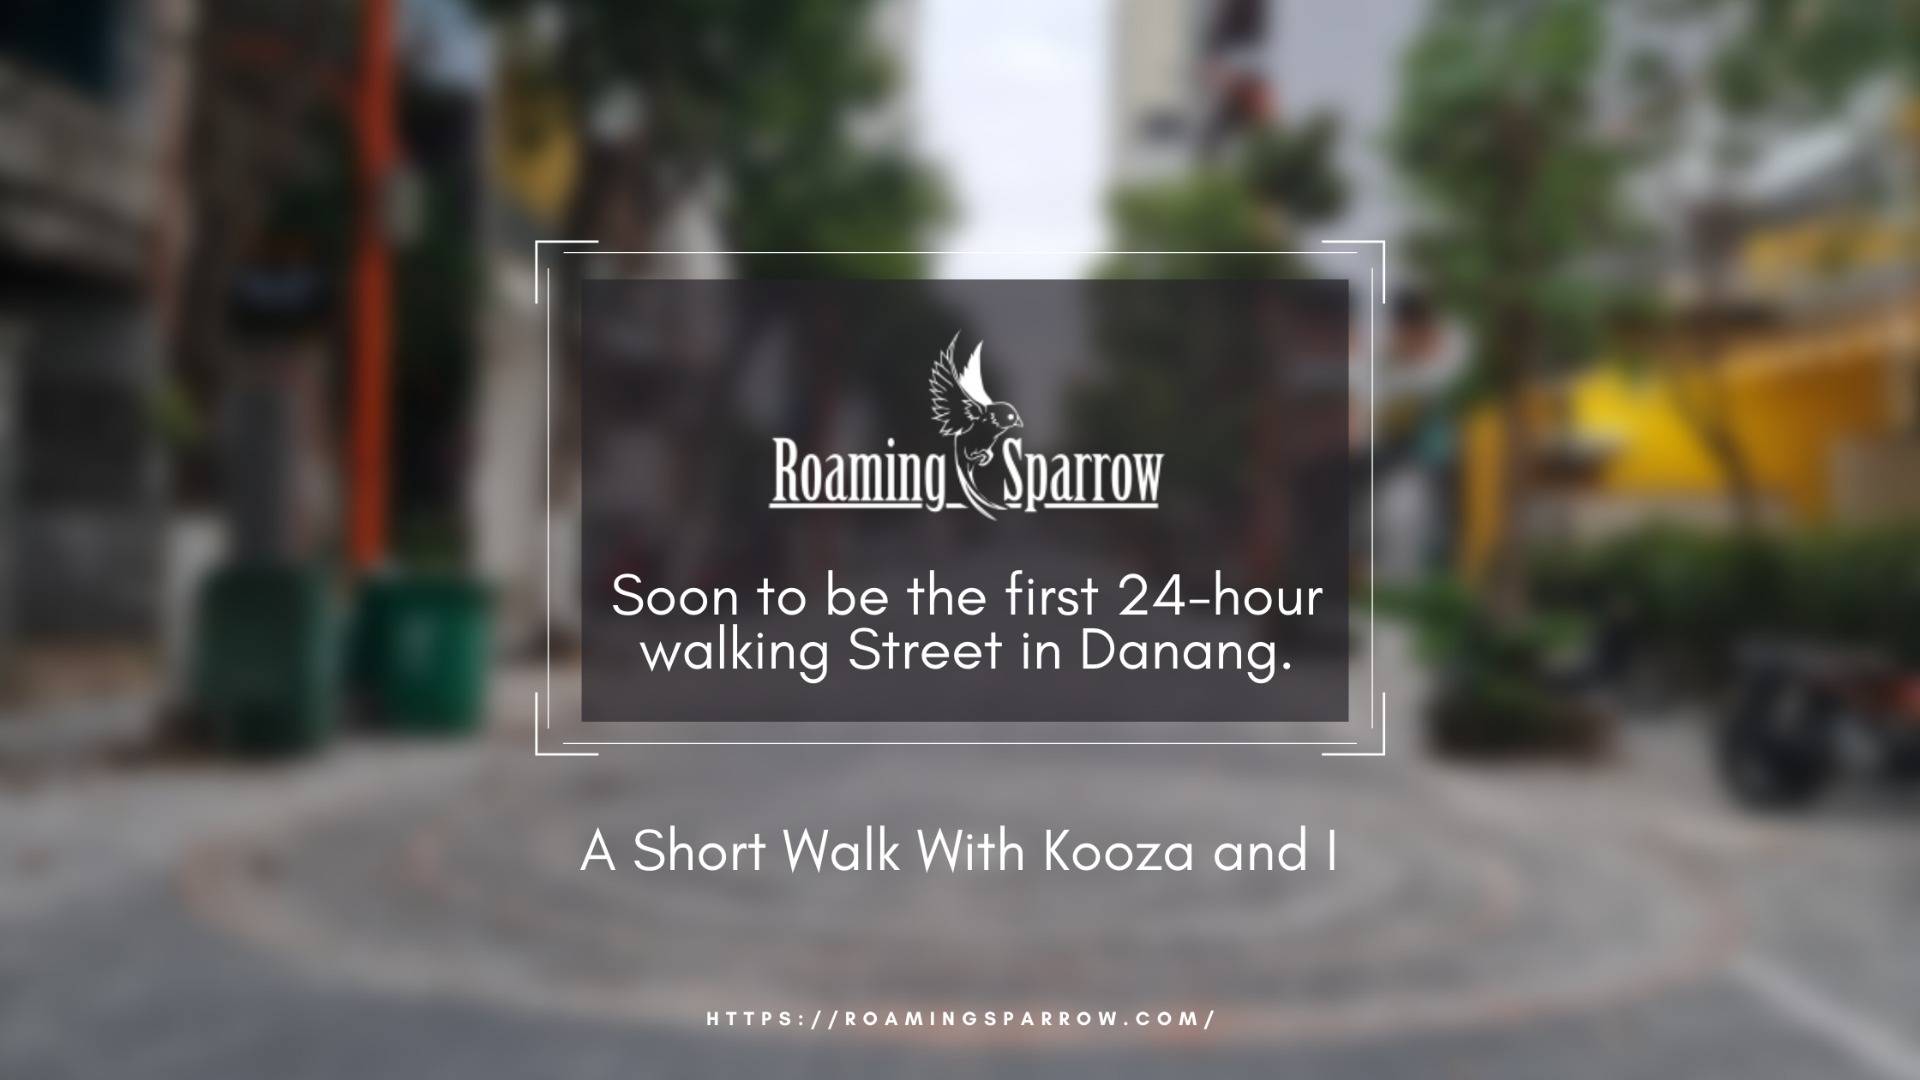 Soon to be the first 24-hour walking Street in Danang.